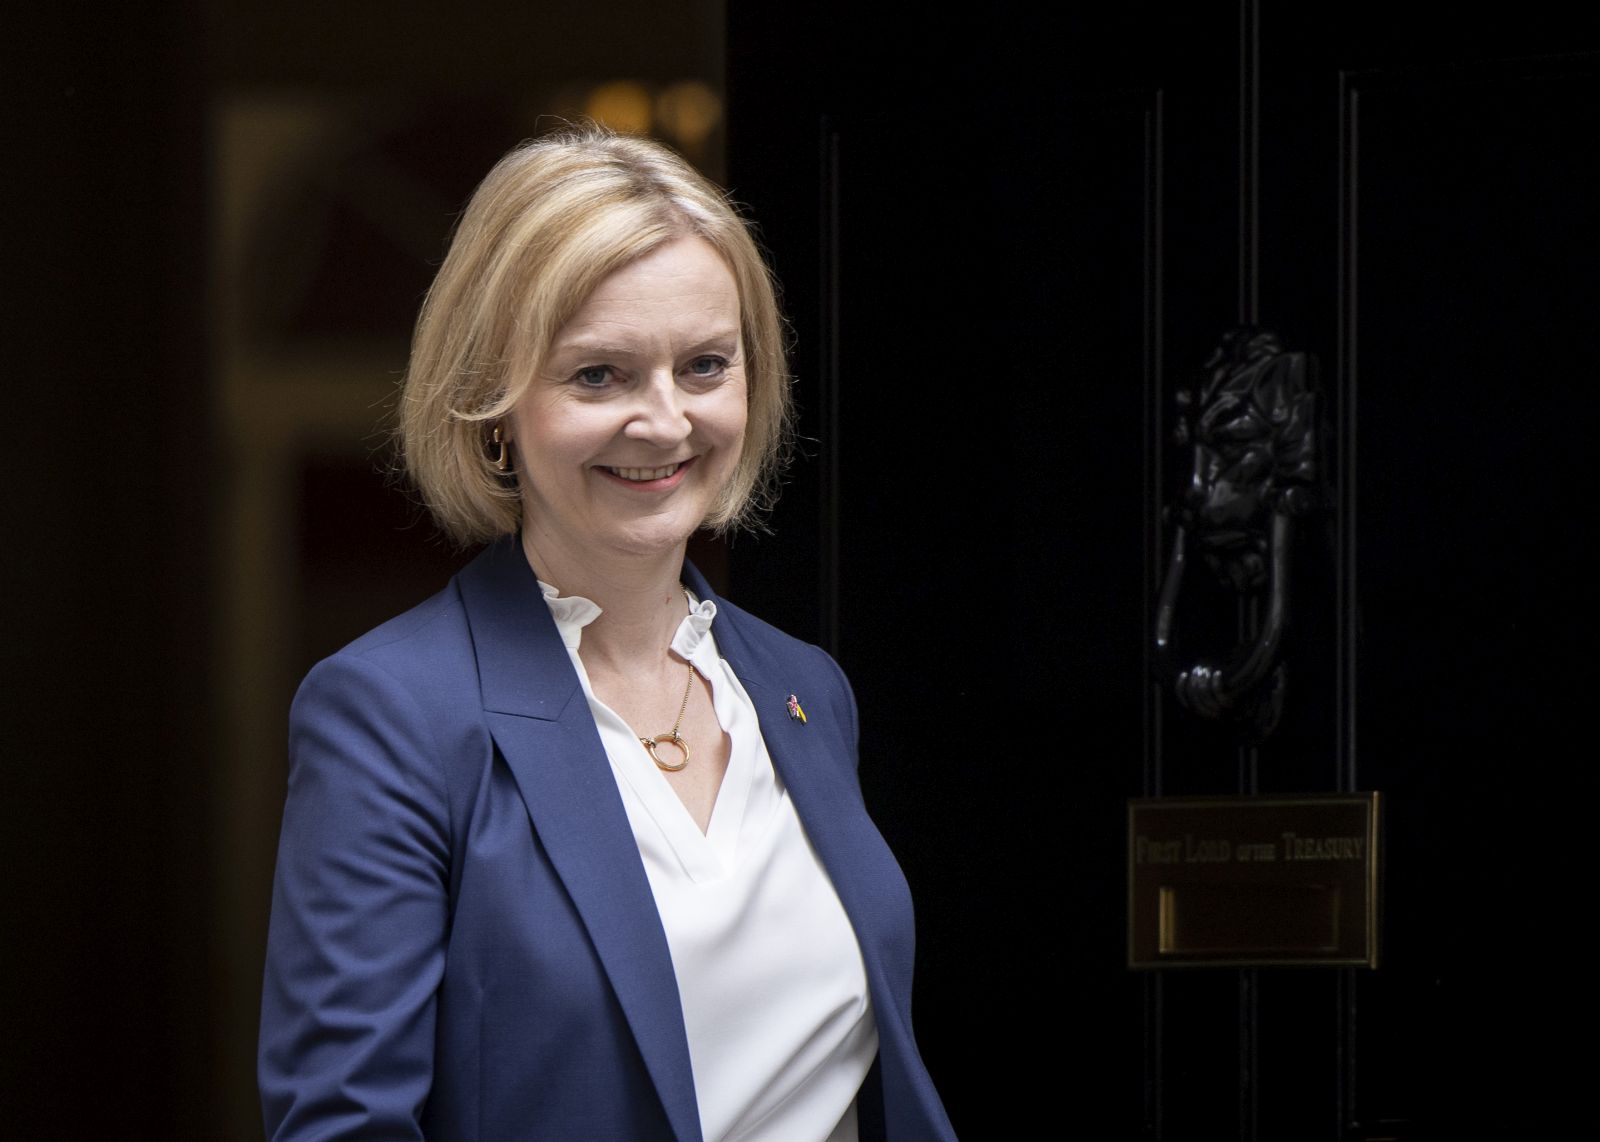 epa10166745 Britain's Prime Minister Liz Truss departs her official residence at 10 Downing Street to appear at her first Prime Minister's Questions at Parliament in London, Britain, 07 September 2022.  Truss will face questions in the Houses of Parliament for the first time since becoming Britain's Prime Minister on 06 September.  EPA/TOLGA AKMEN